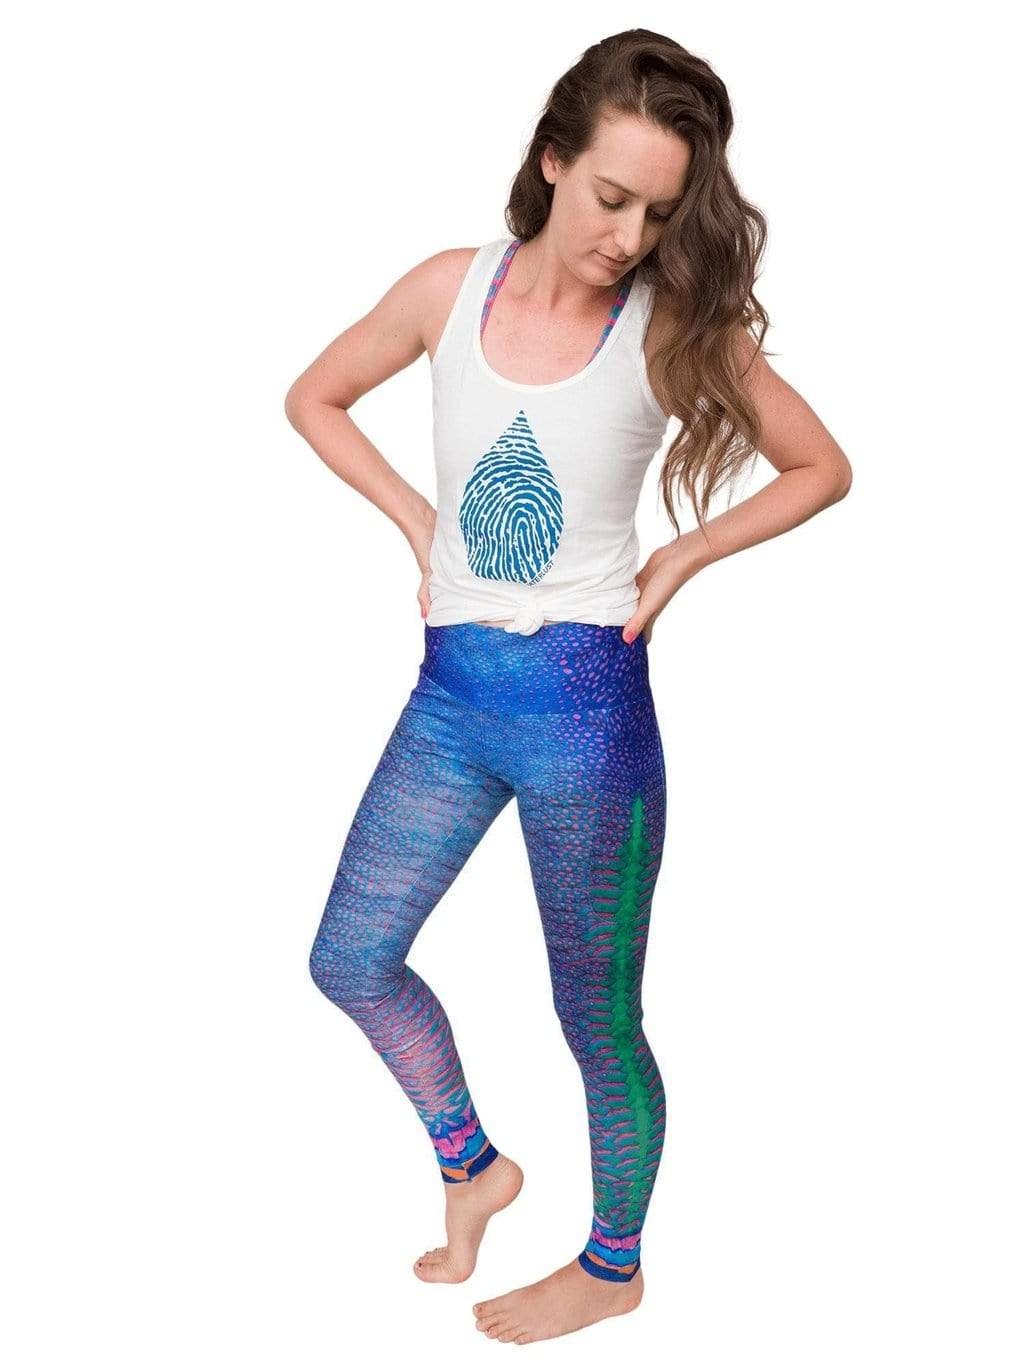 Model: Laura is our Chief Product Officer at Waterlust, a scuba diver, kiter and recreational yogi. She is 5’10, 147 lbs, 34B and is wearing a size M tank and M legging.